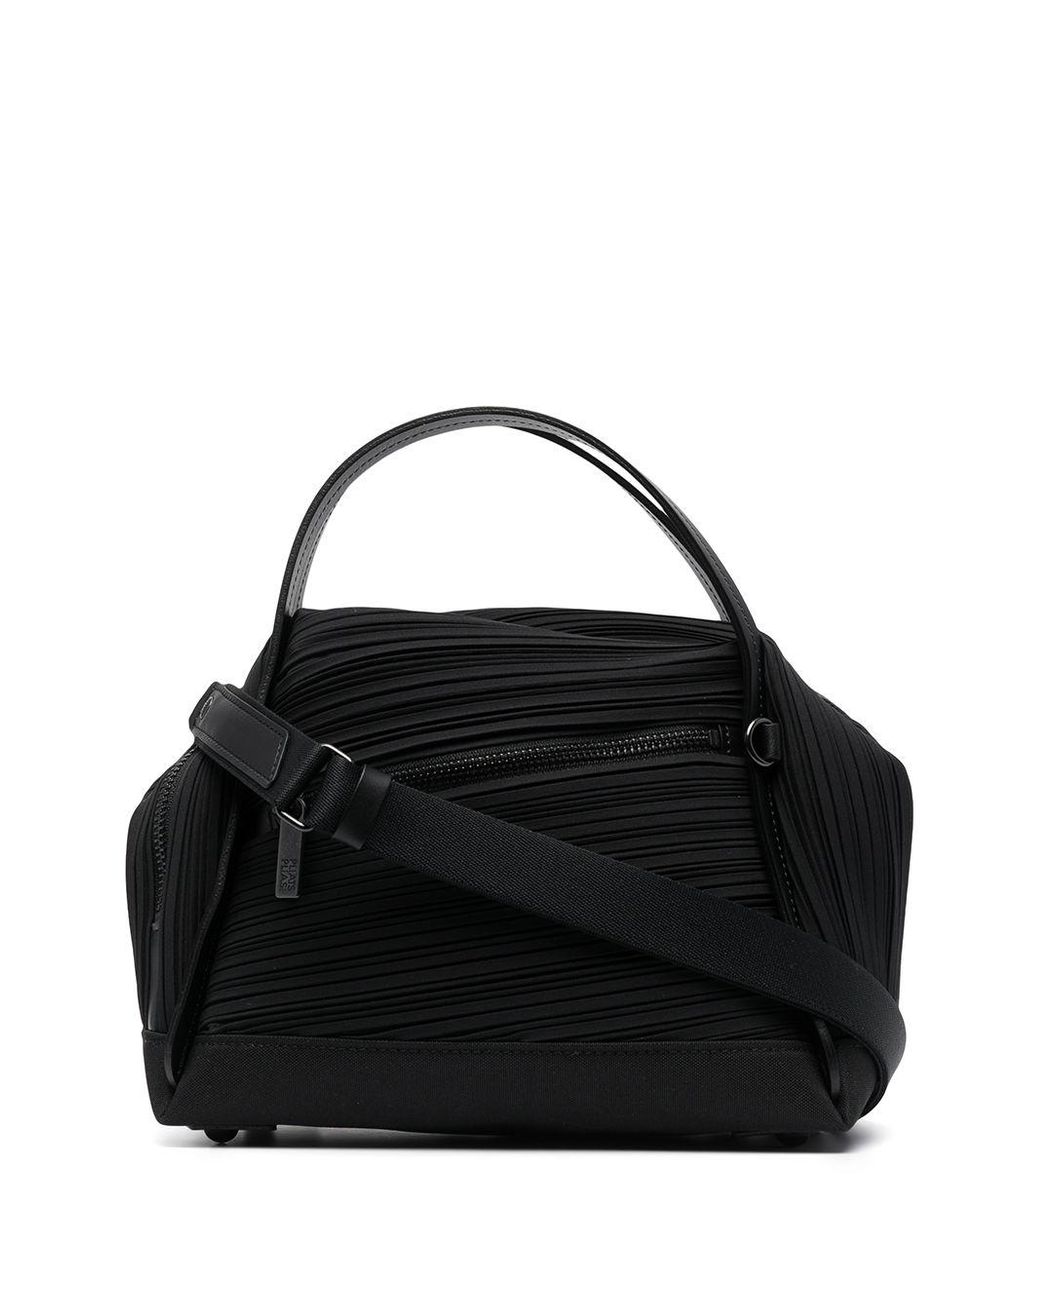 Pleats Please Issey Miyake Pleated Leather Shoulder Bag in Black - Lyst